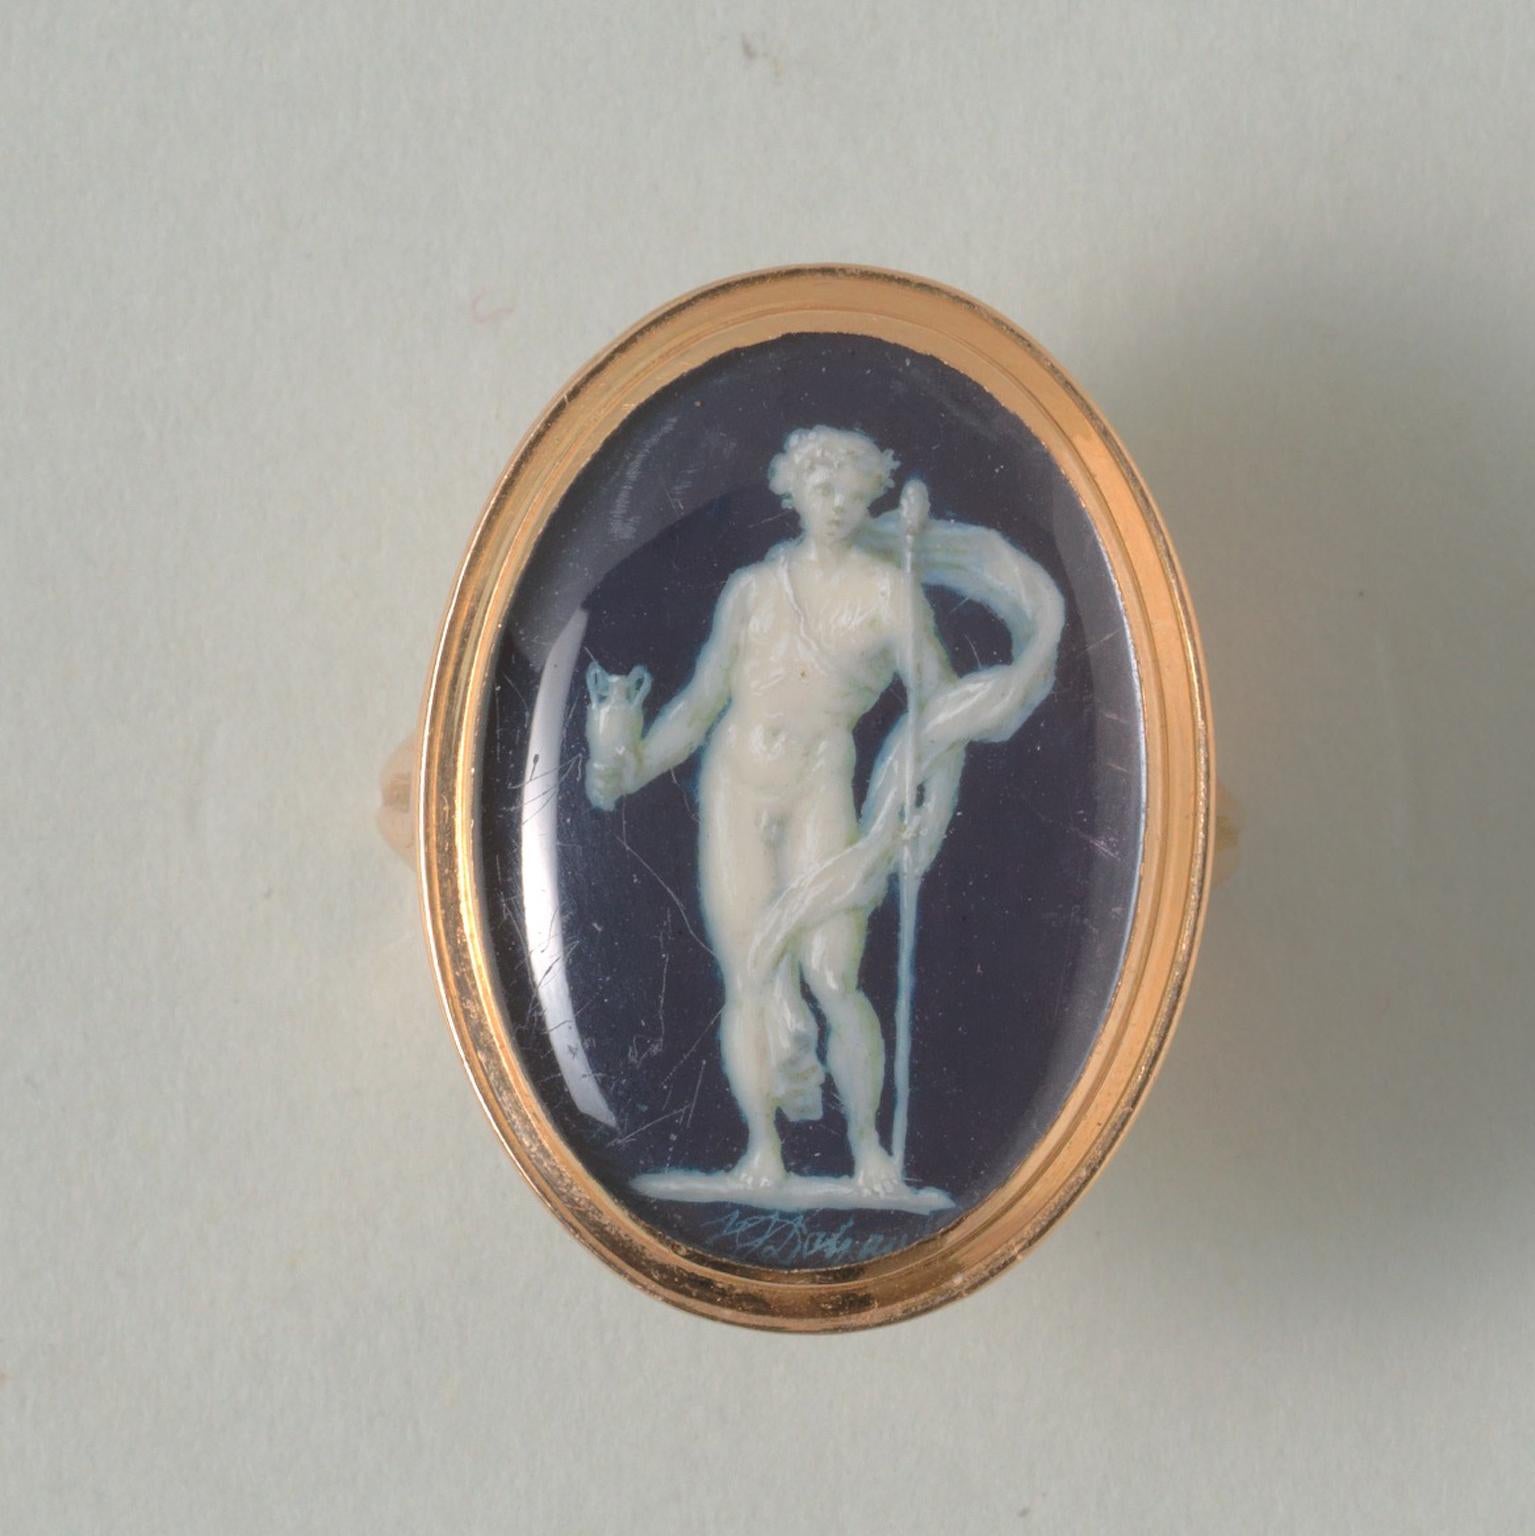 This French ring, from around 1780, is crafted in 18 carat gold. Under the glass we see the god Bacchus, the god of wine and merriment. It is a signed work by Jacques-Joseph de Gault (1738 – 1812). Both the image and its setting are original and in